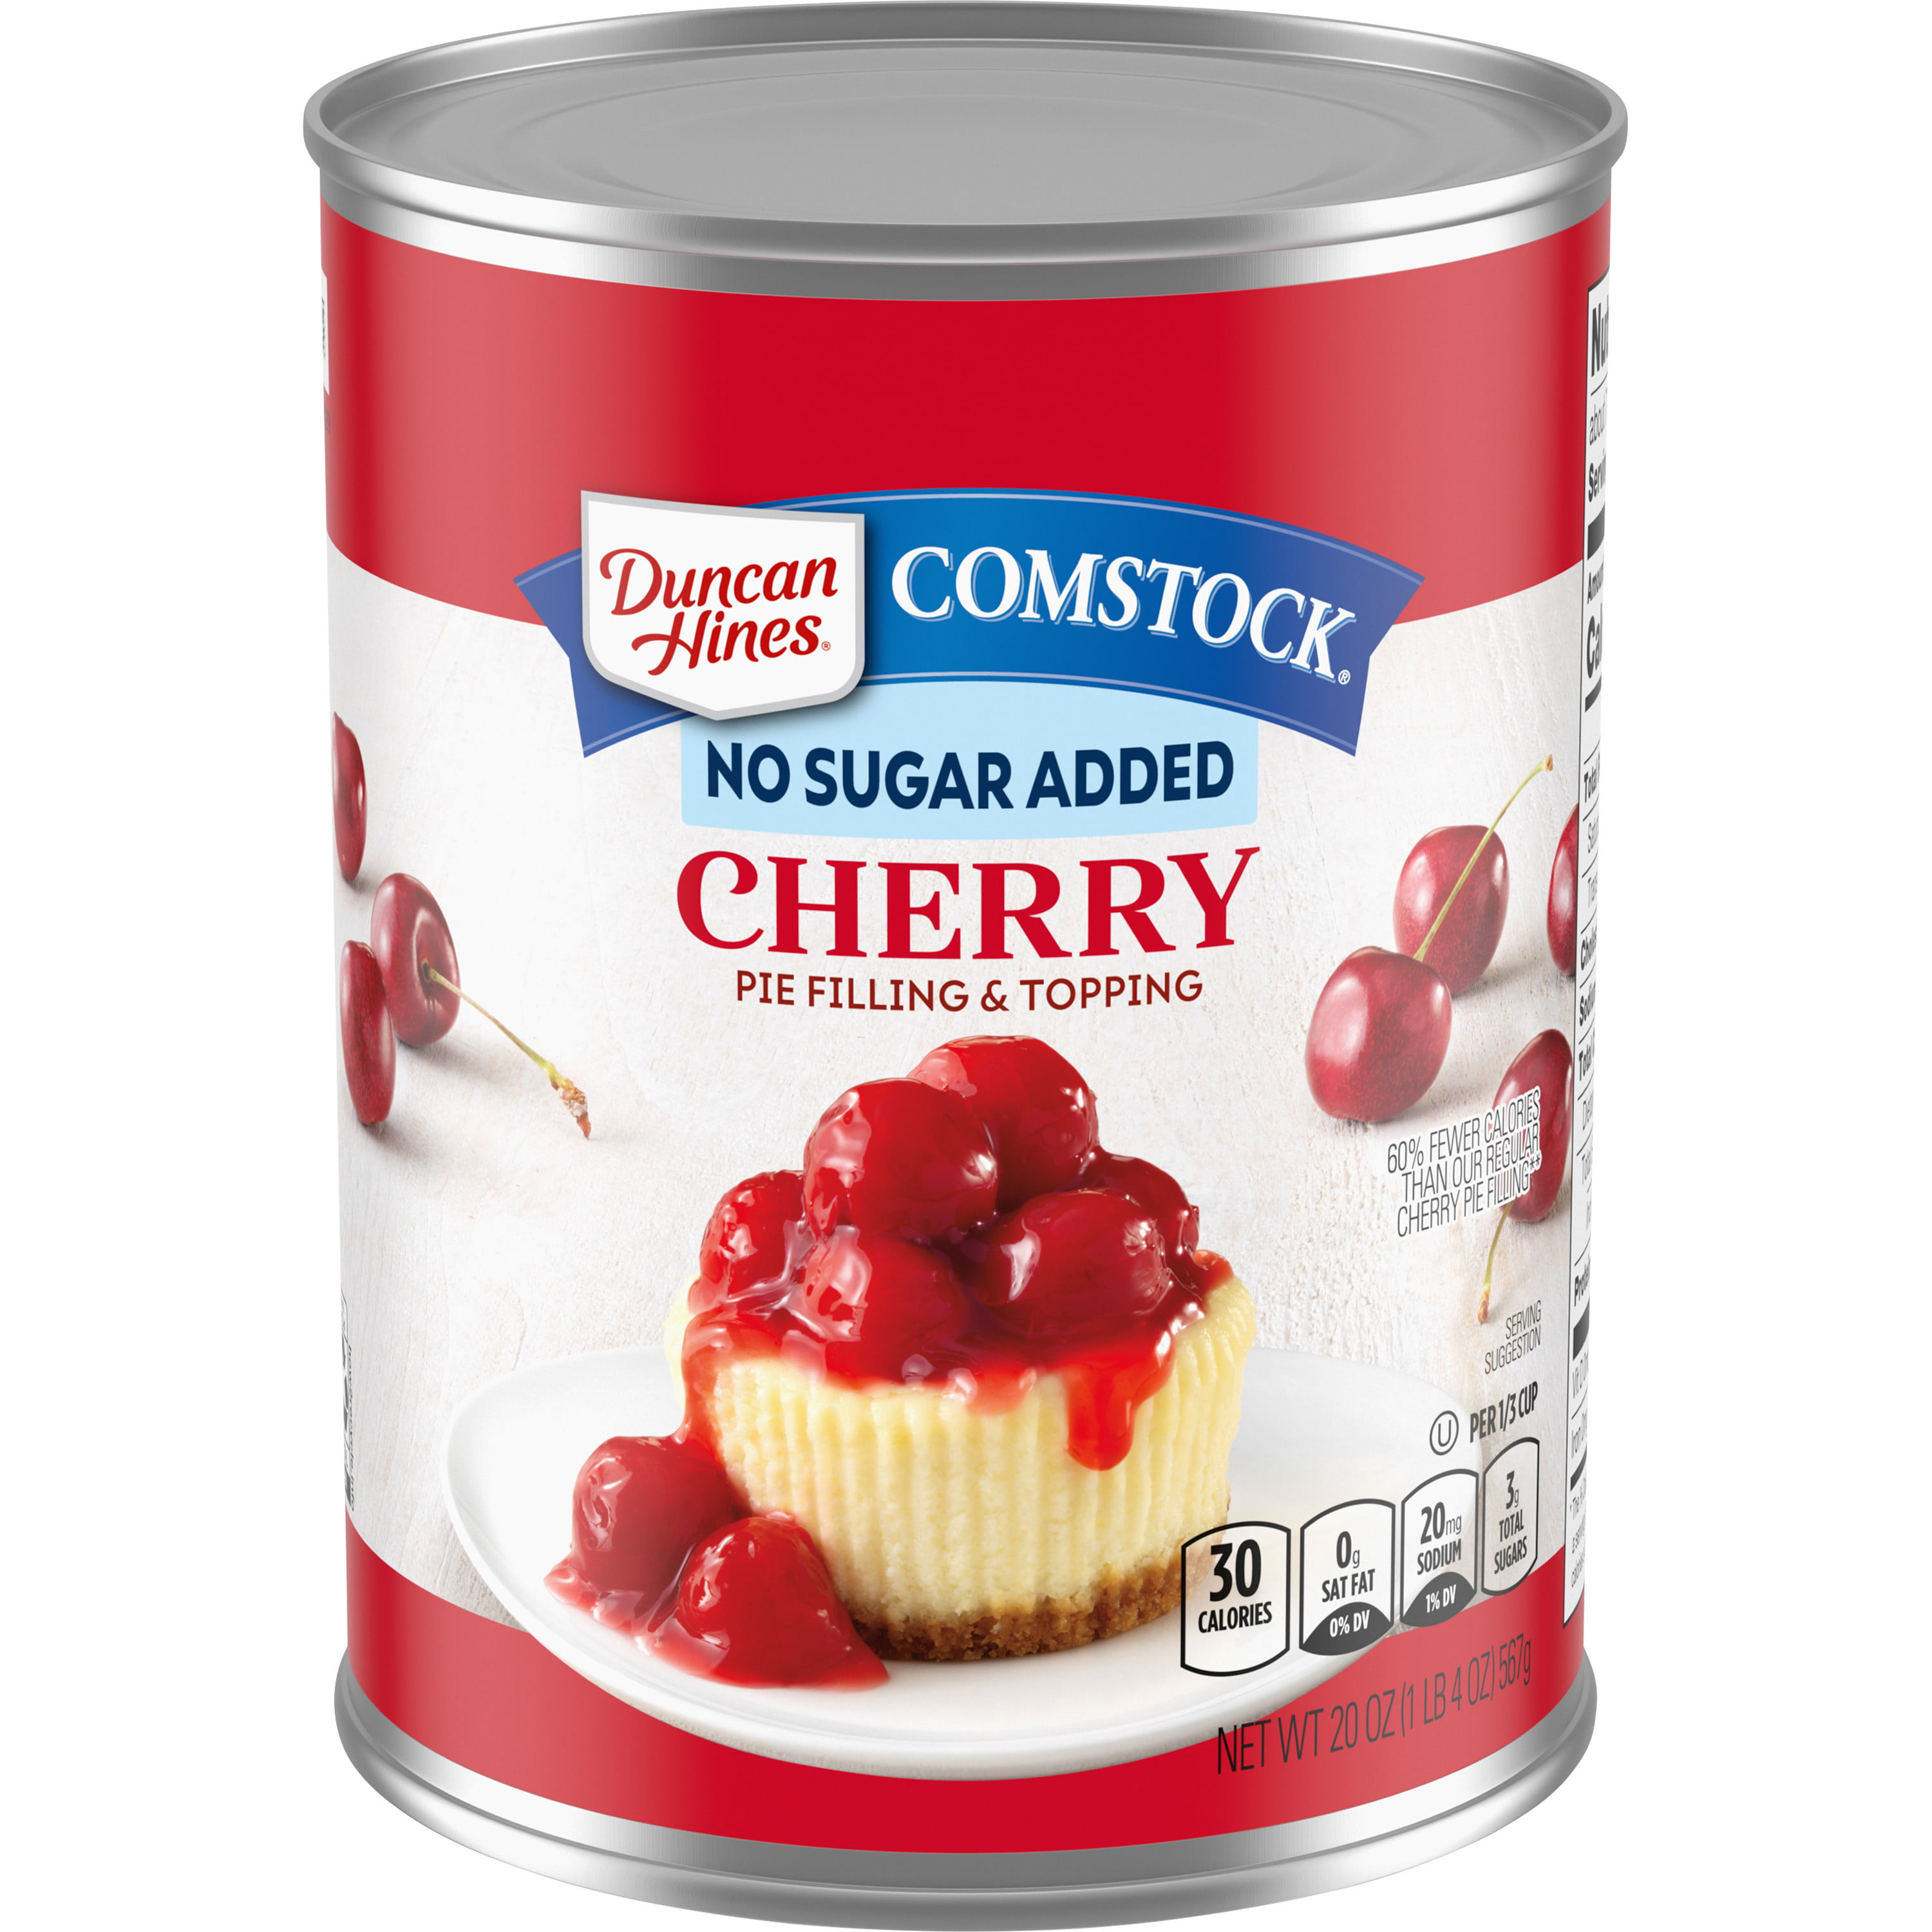 Duncan Hines Comstock No Sugar Added Cherry Pie Filling and Topping, 20